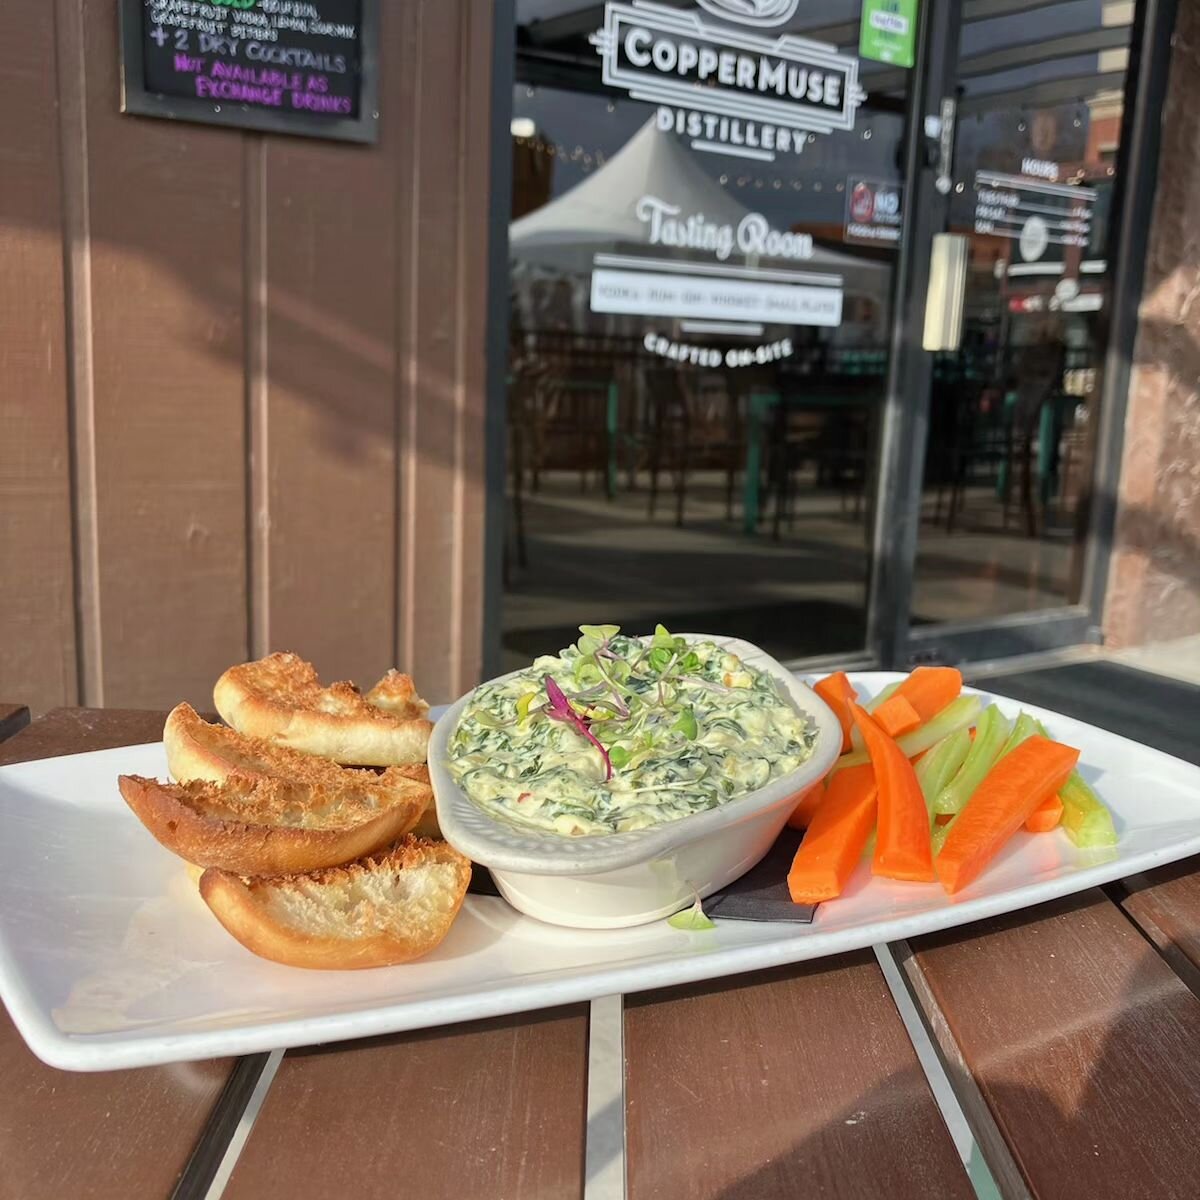 Nothing better than snacks and bingo! 🤗

Our Spinach Artichoke dip shareable is just $10 until Saturday! 

#yum #foco #noco #bingowednesday #spindip #downtownfortcollins ##visitfortcollins #spring #spirits #craftdistillery #craftdistilling #beamuse 